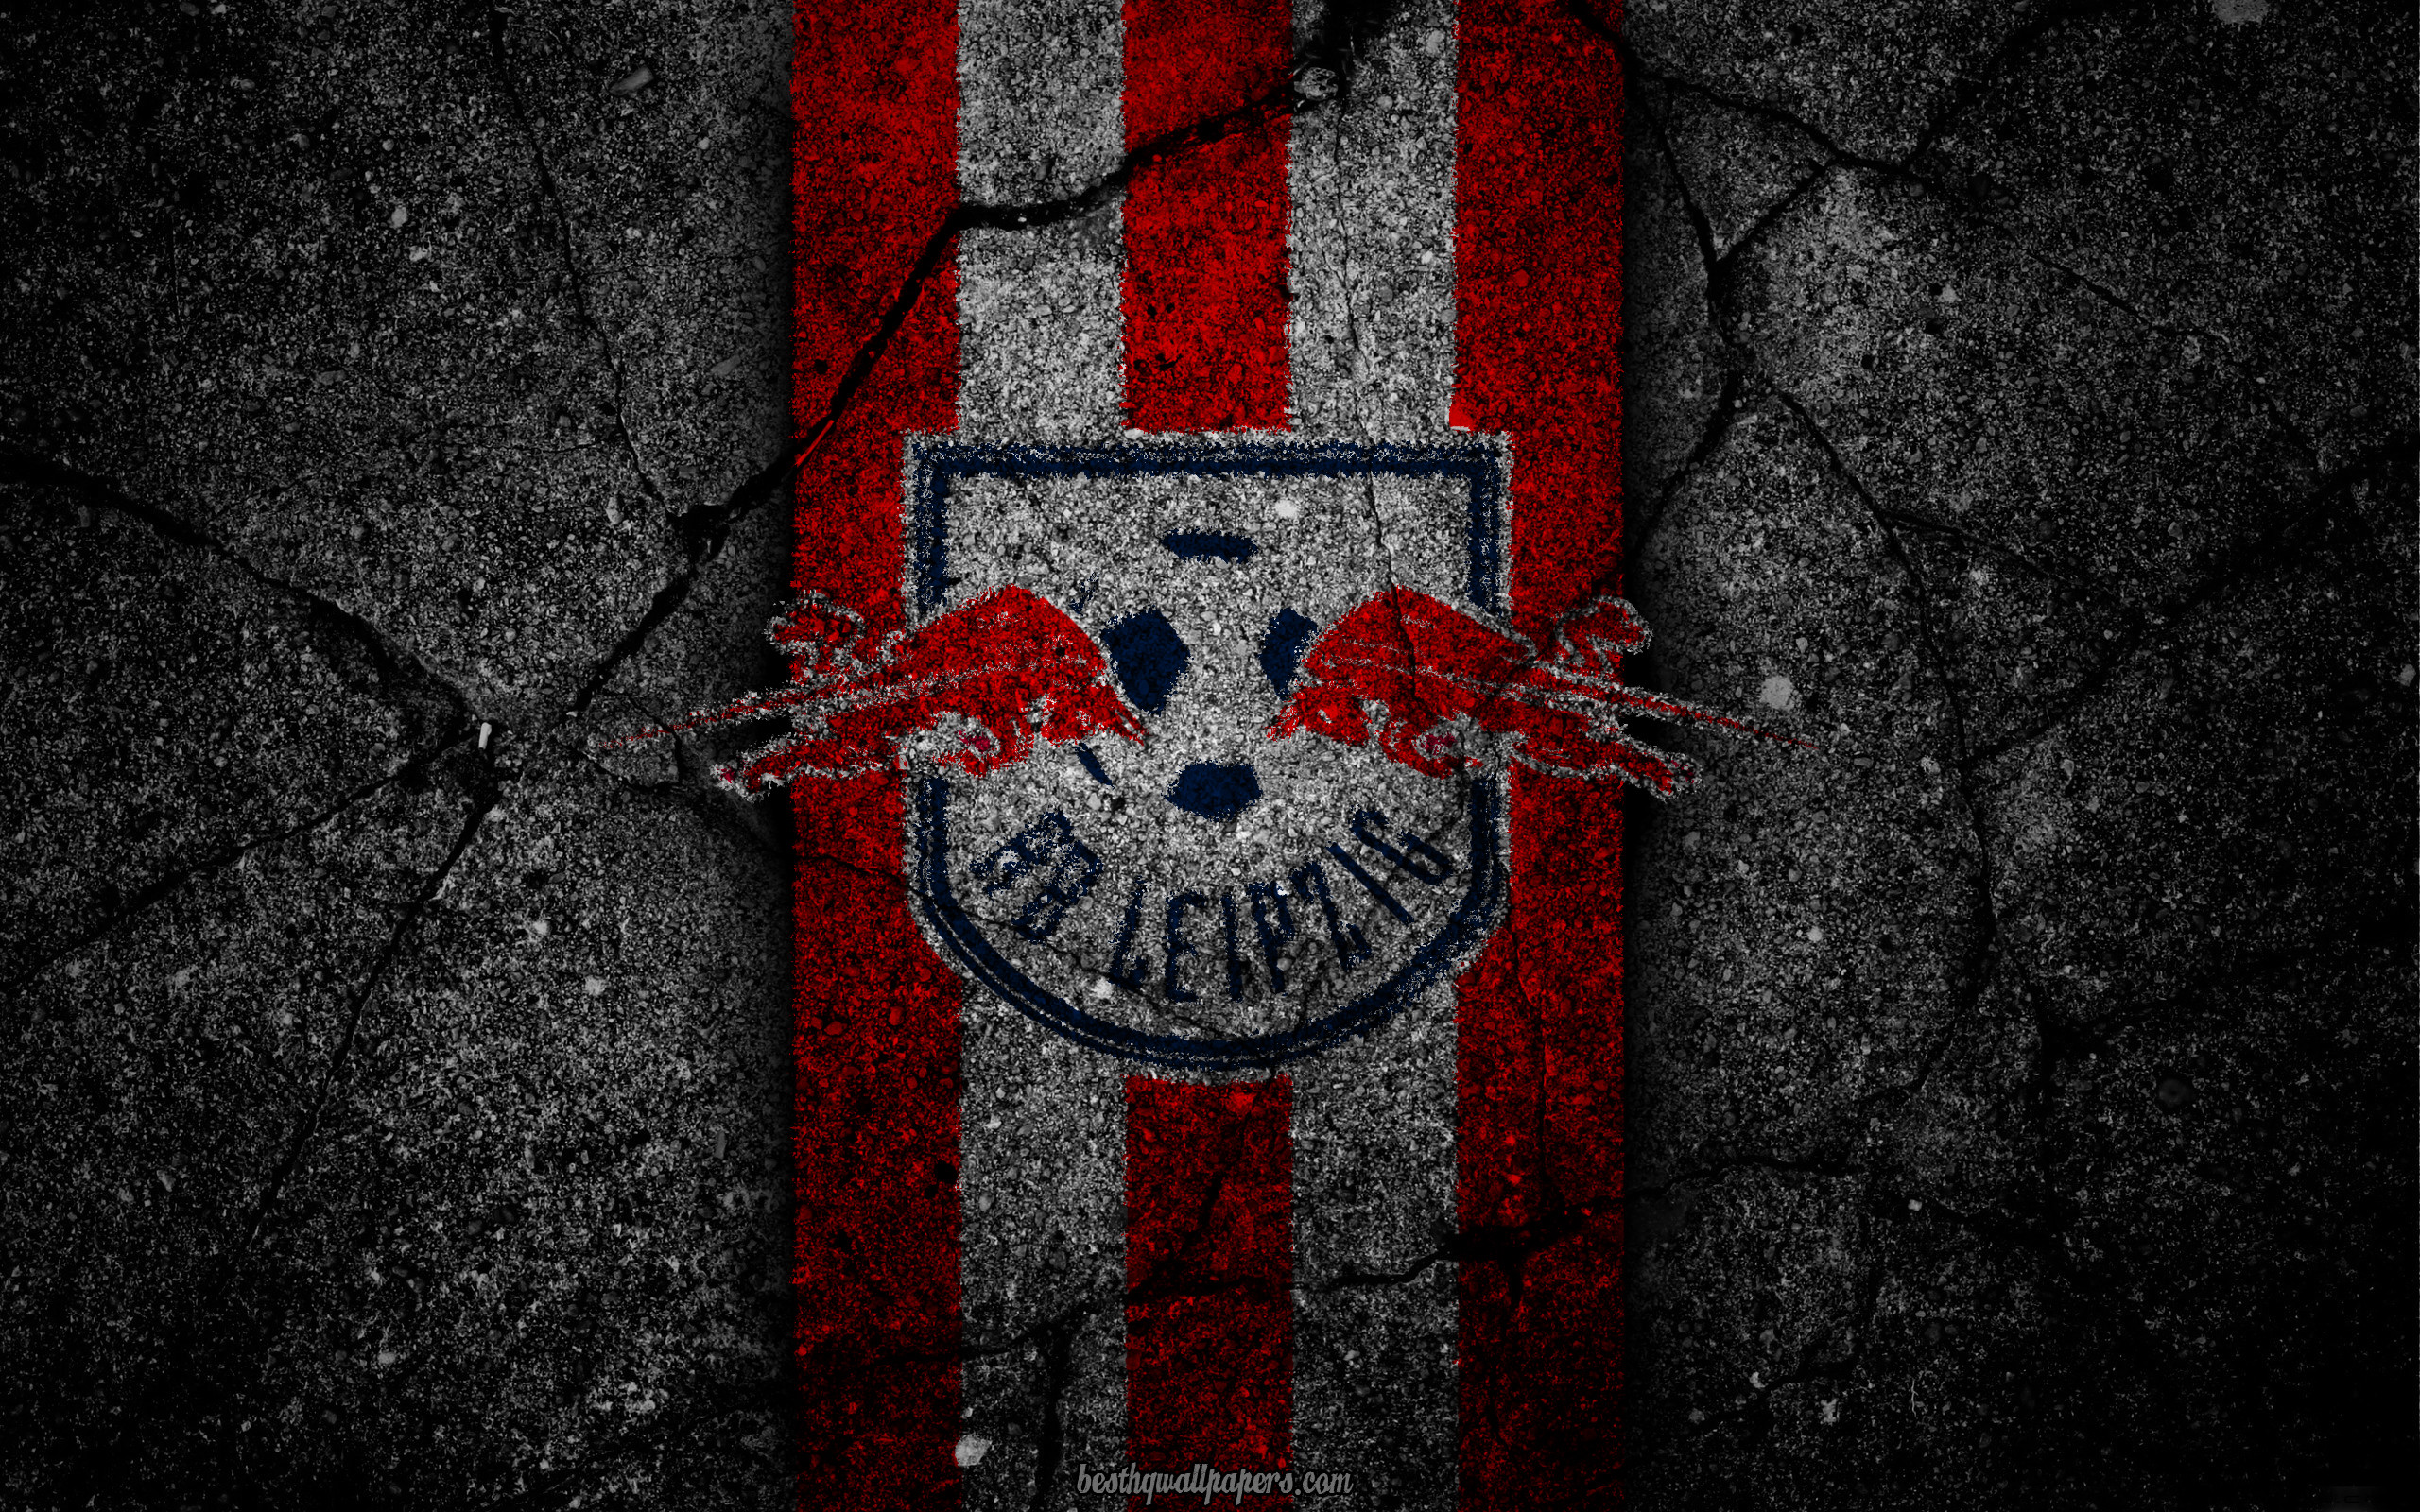 Rb Leipzig Wallpapers Wallpaper Cave